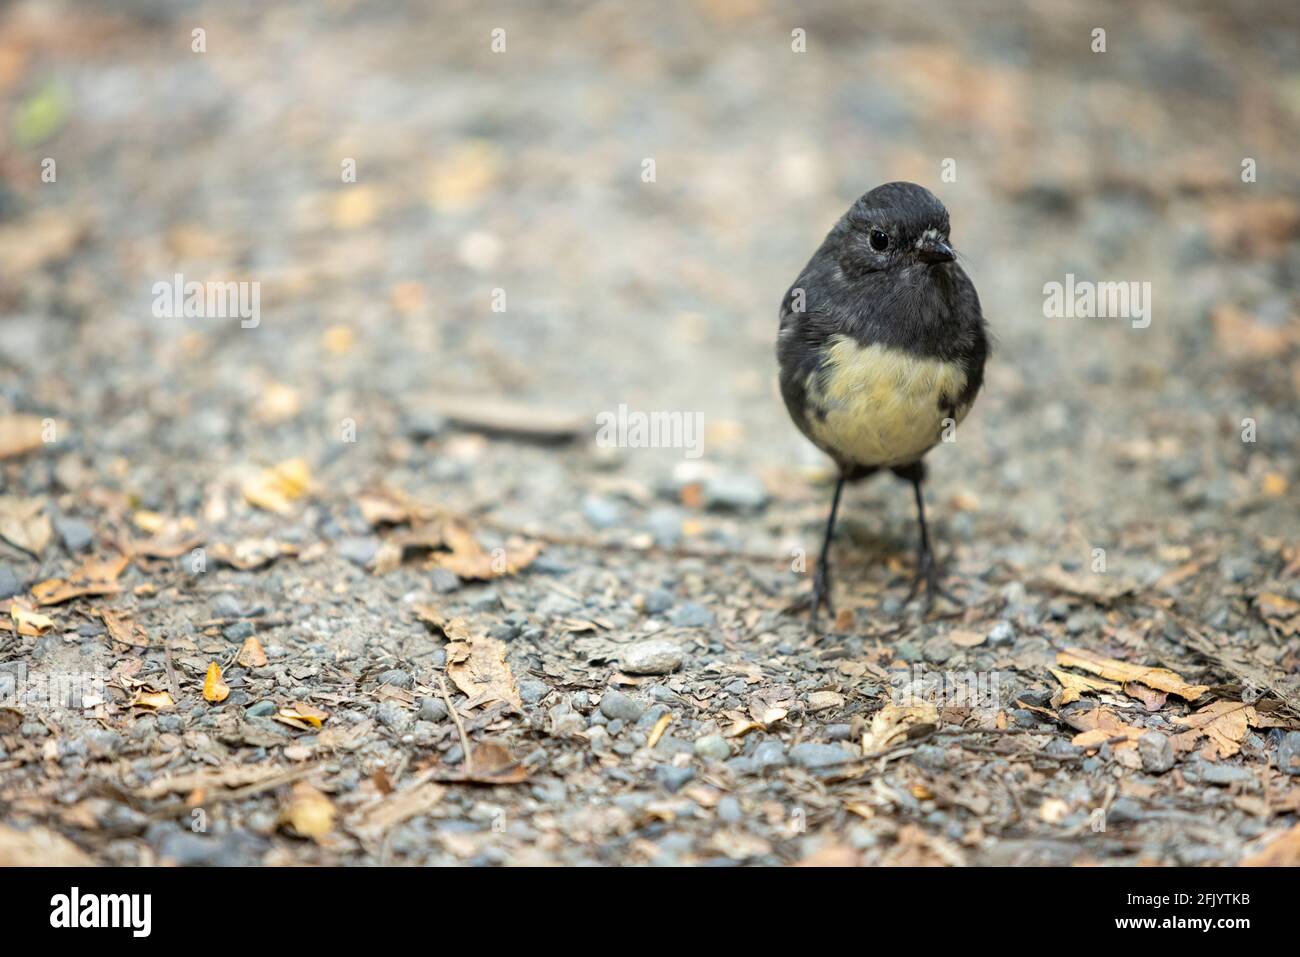 South Island Robin or Toutouwai, an Endemic New Zealand Forest bird standing on the track running through the forest Stock Photo